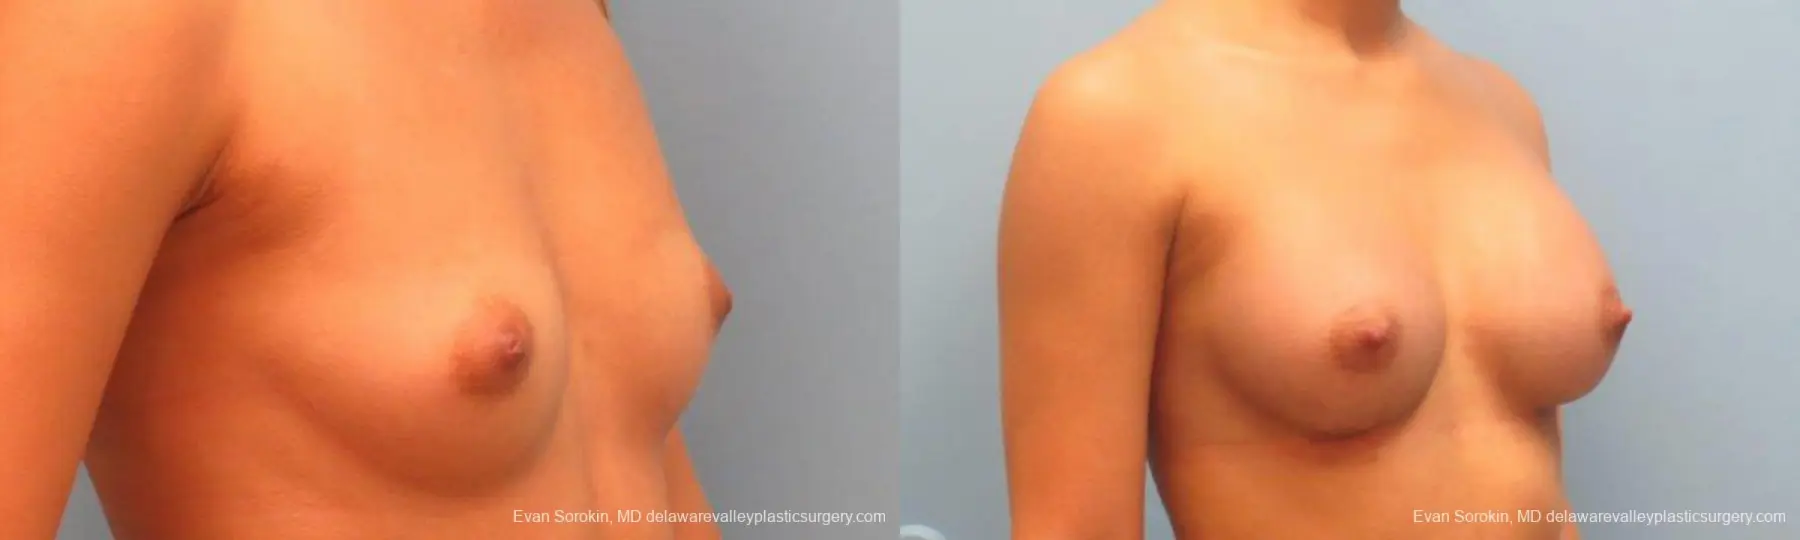 Philadelphia Breast Augmentation 9341 - Before and After 2